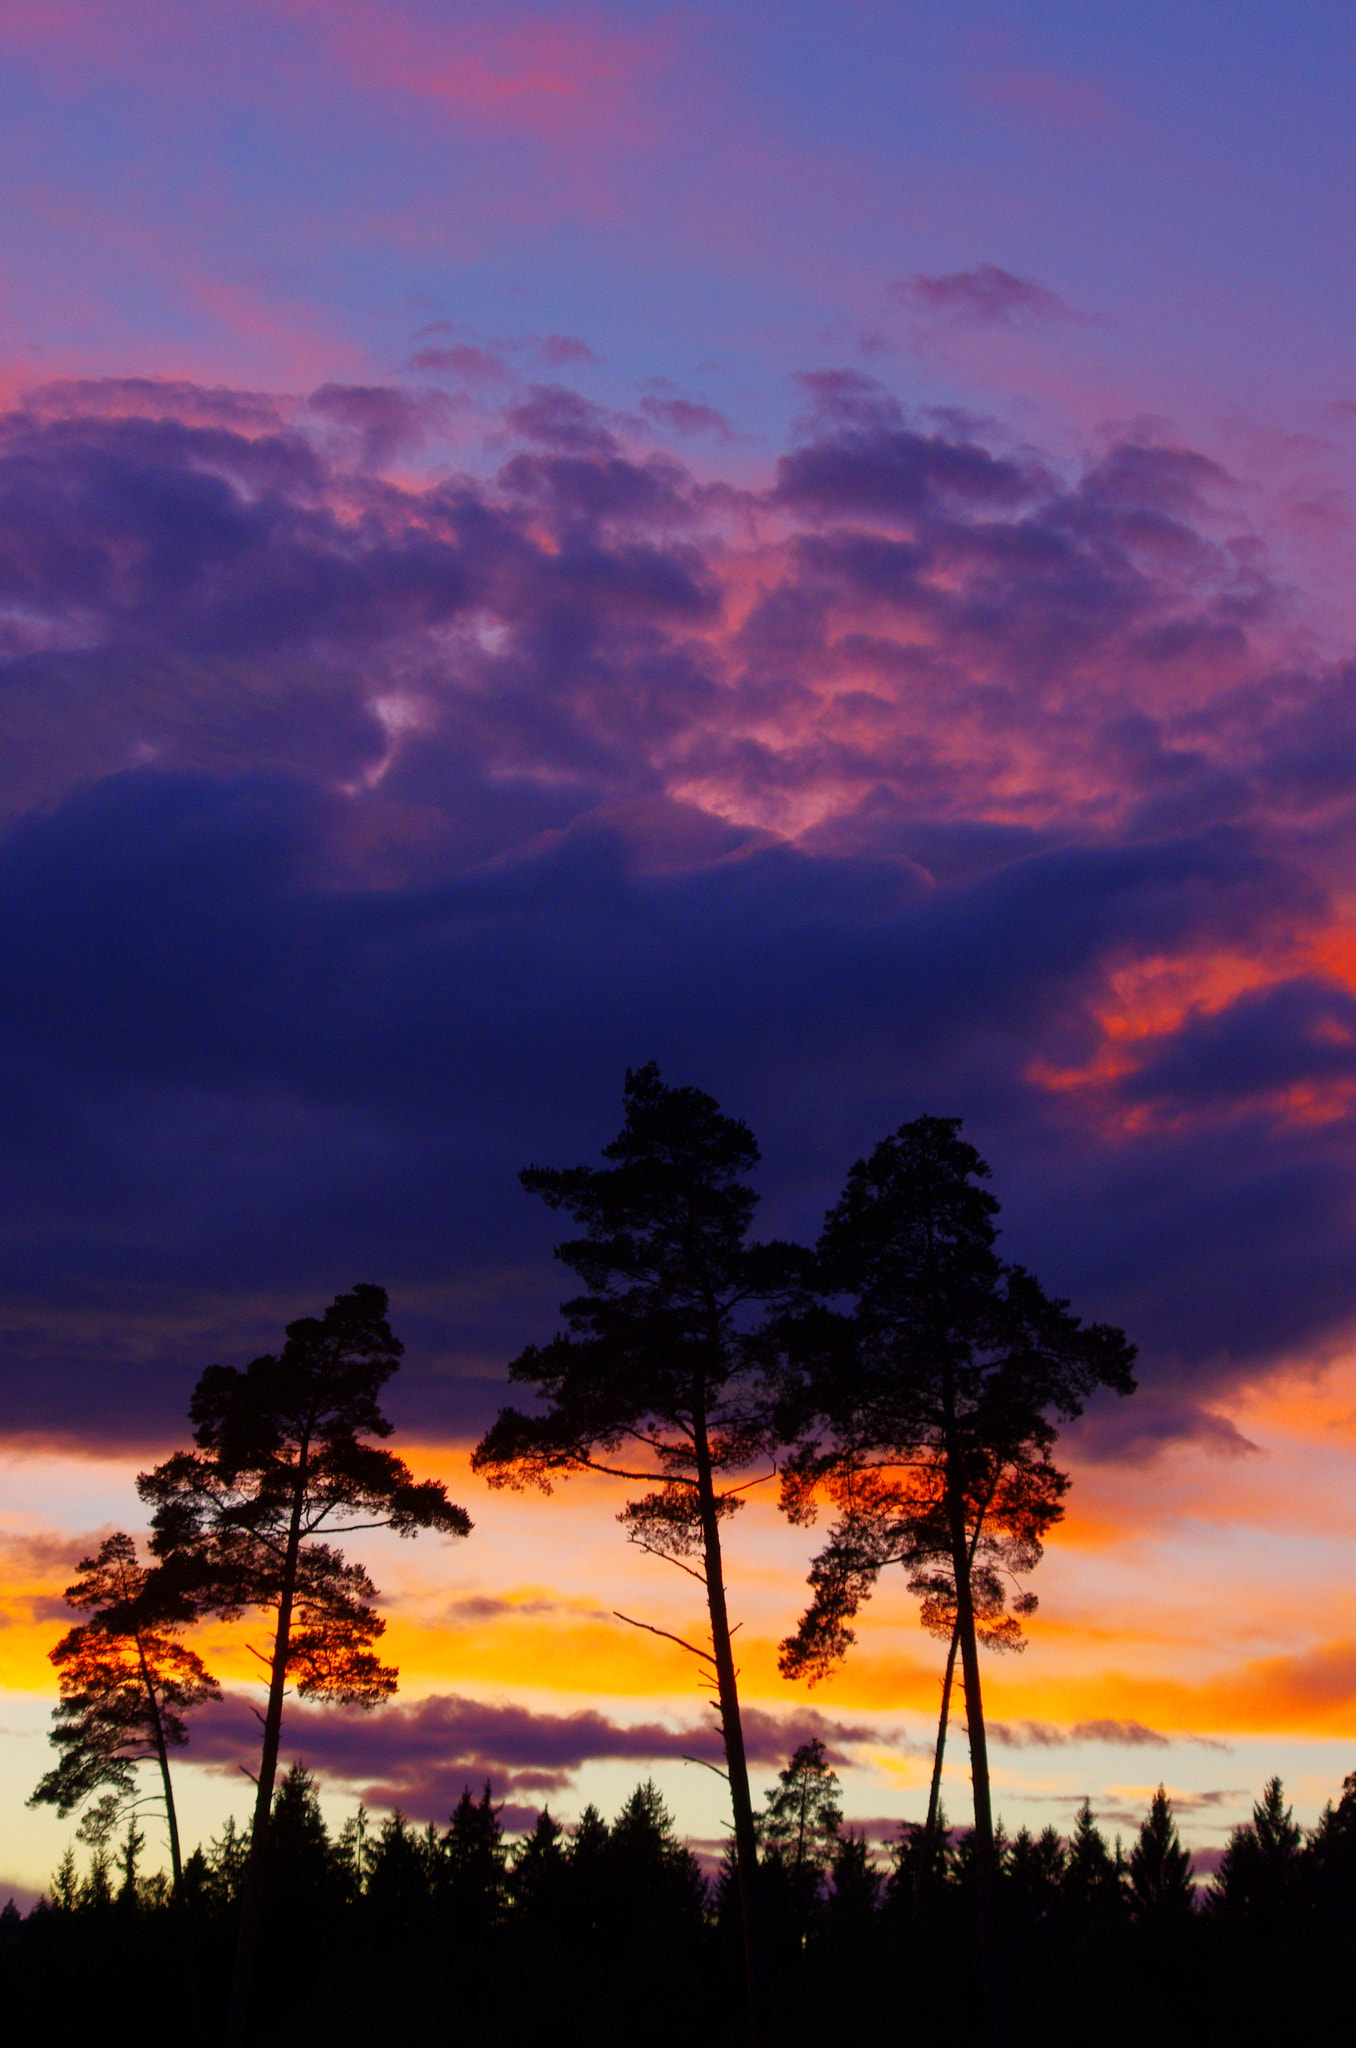 Pentax K-5 sample photo. Tall pine trees in front of the cloudy evening sky photography